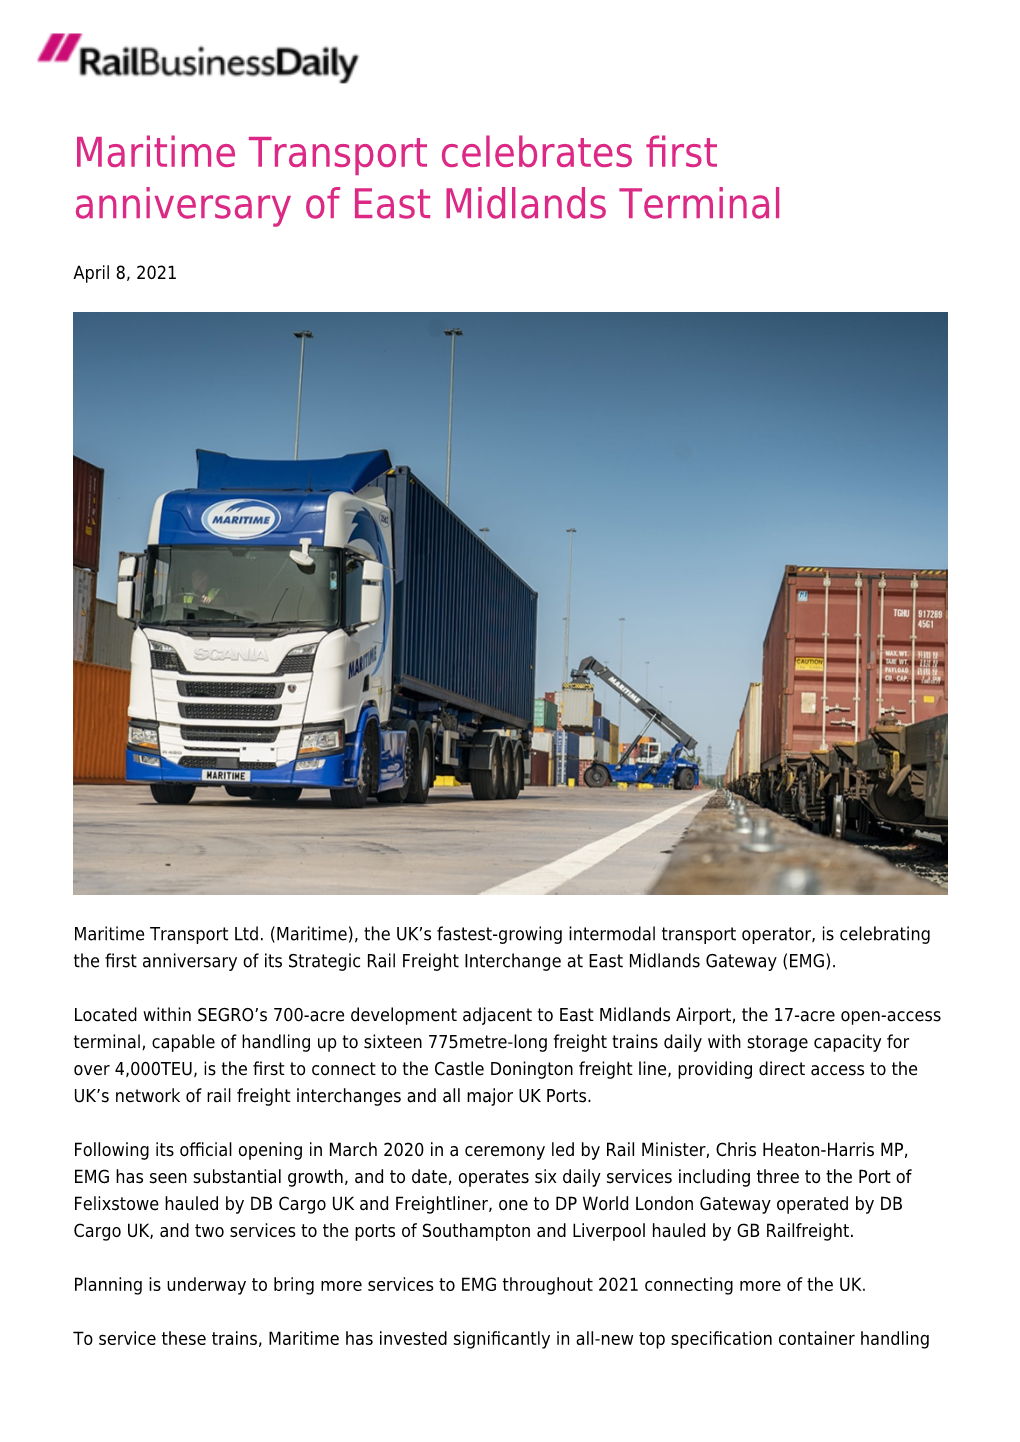 Maritime Transport Celebrates First Anniversary of East Midlands